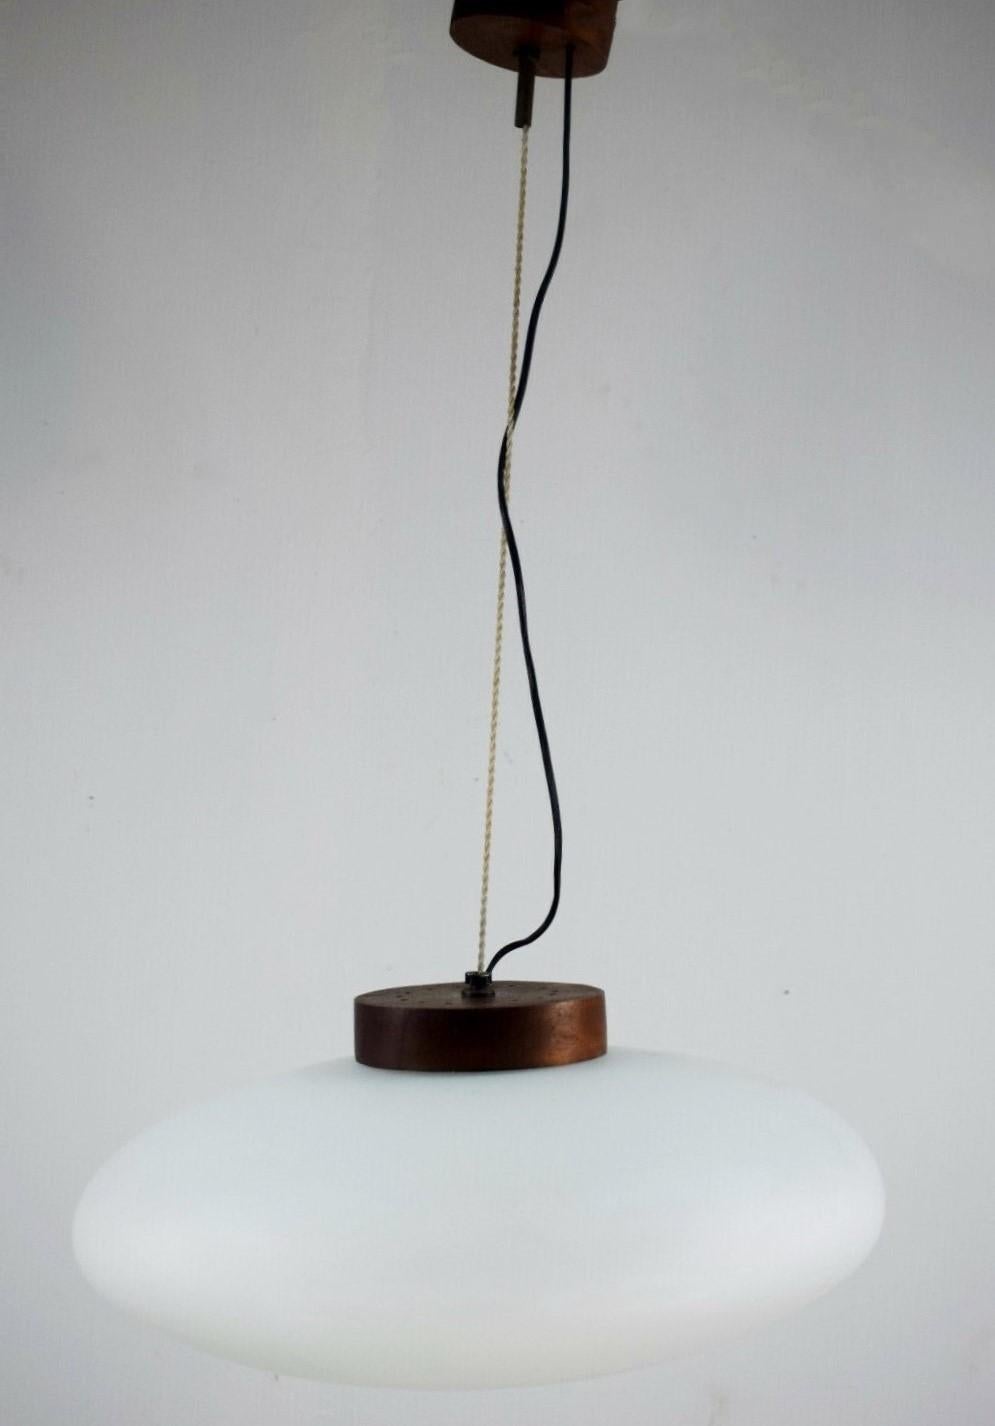 Pendant by Stilnovo manufactured in Italy, 1950s. With large brushed satin glass diffuser, teak wood mounts. It takes one E27 100w bulb. This rare and high quality pendant is in fine vintage condition, no ships or cracks, in fully working condition